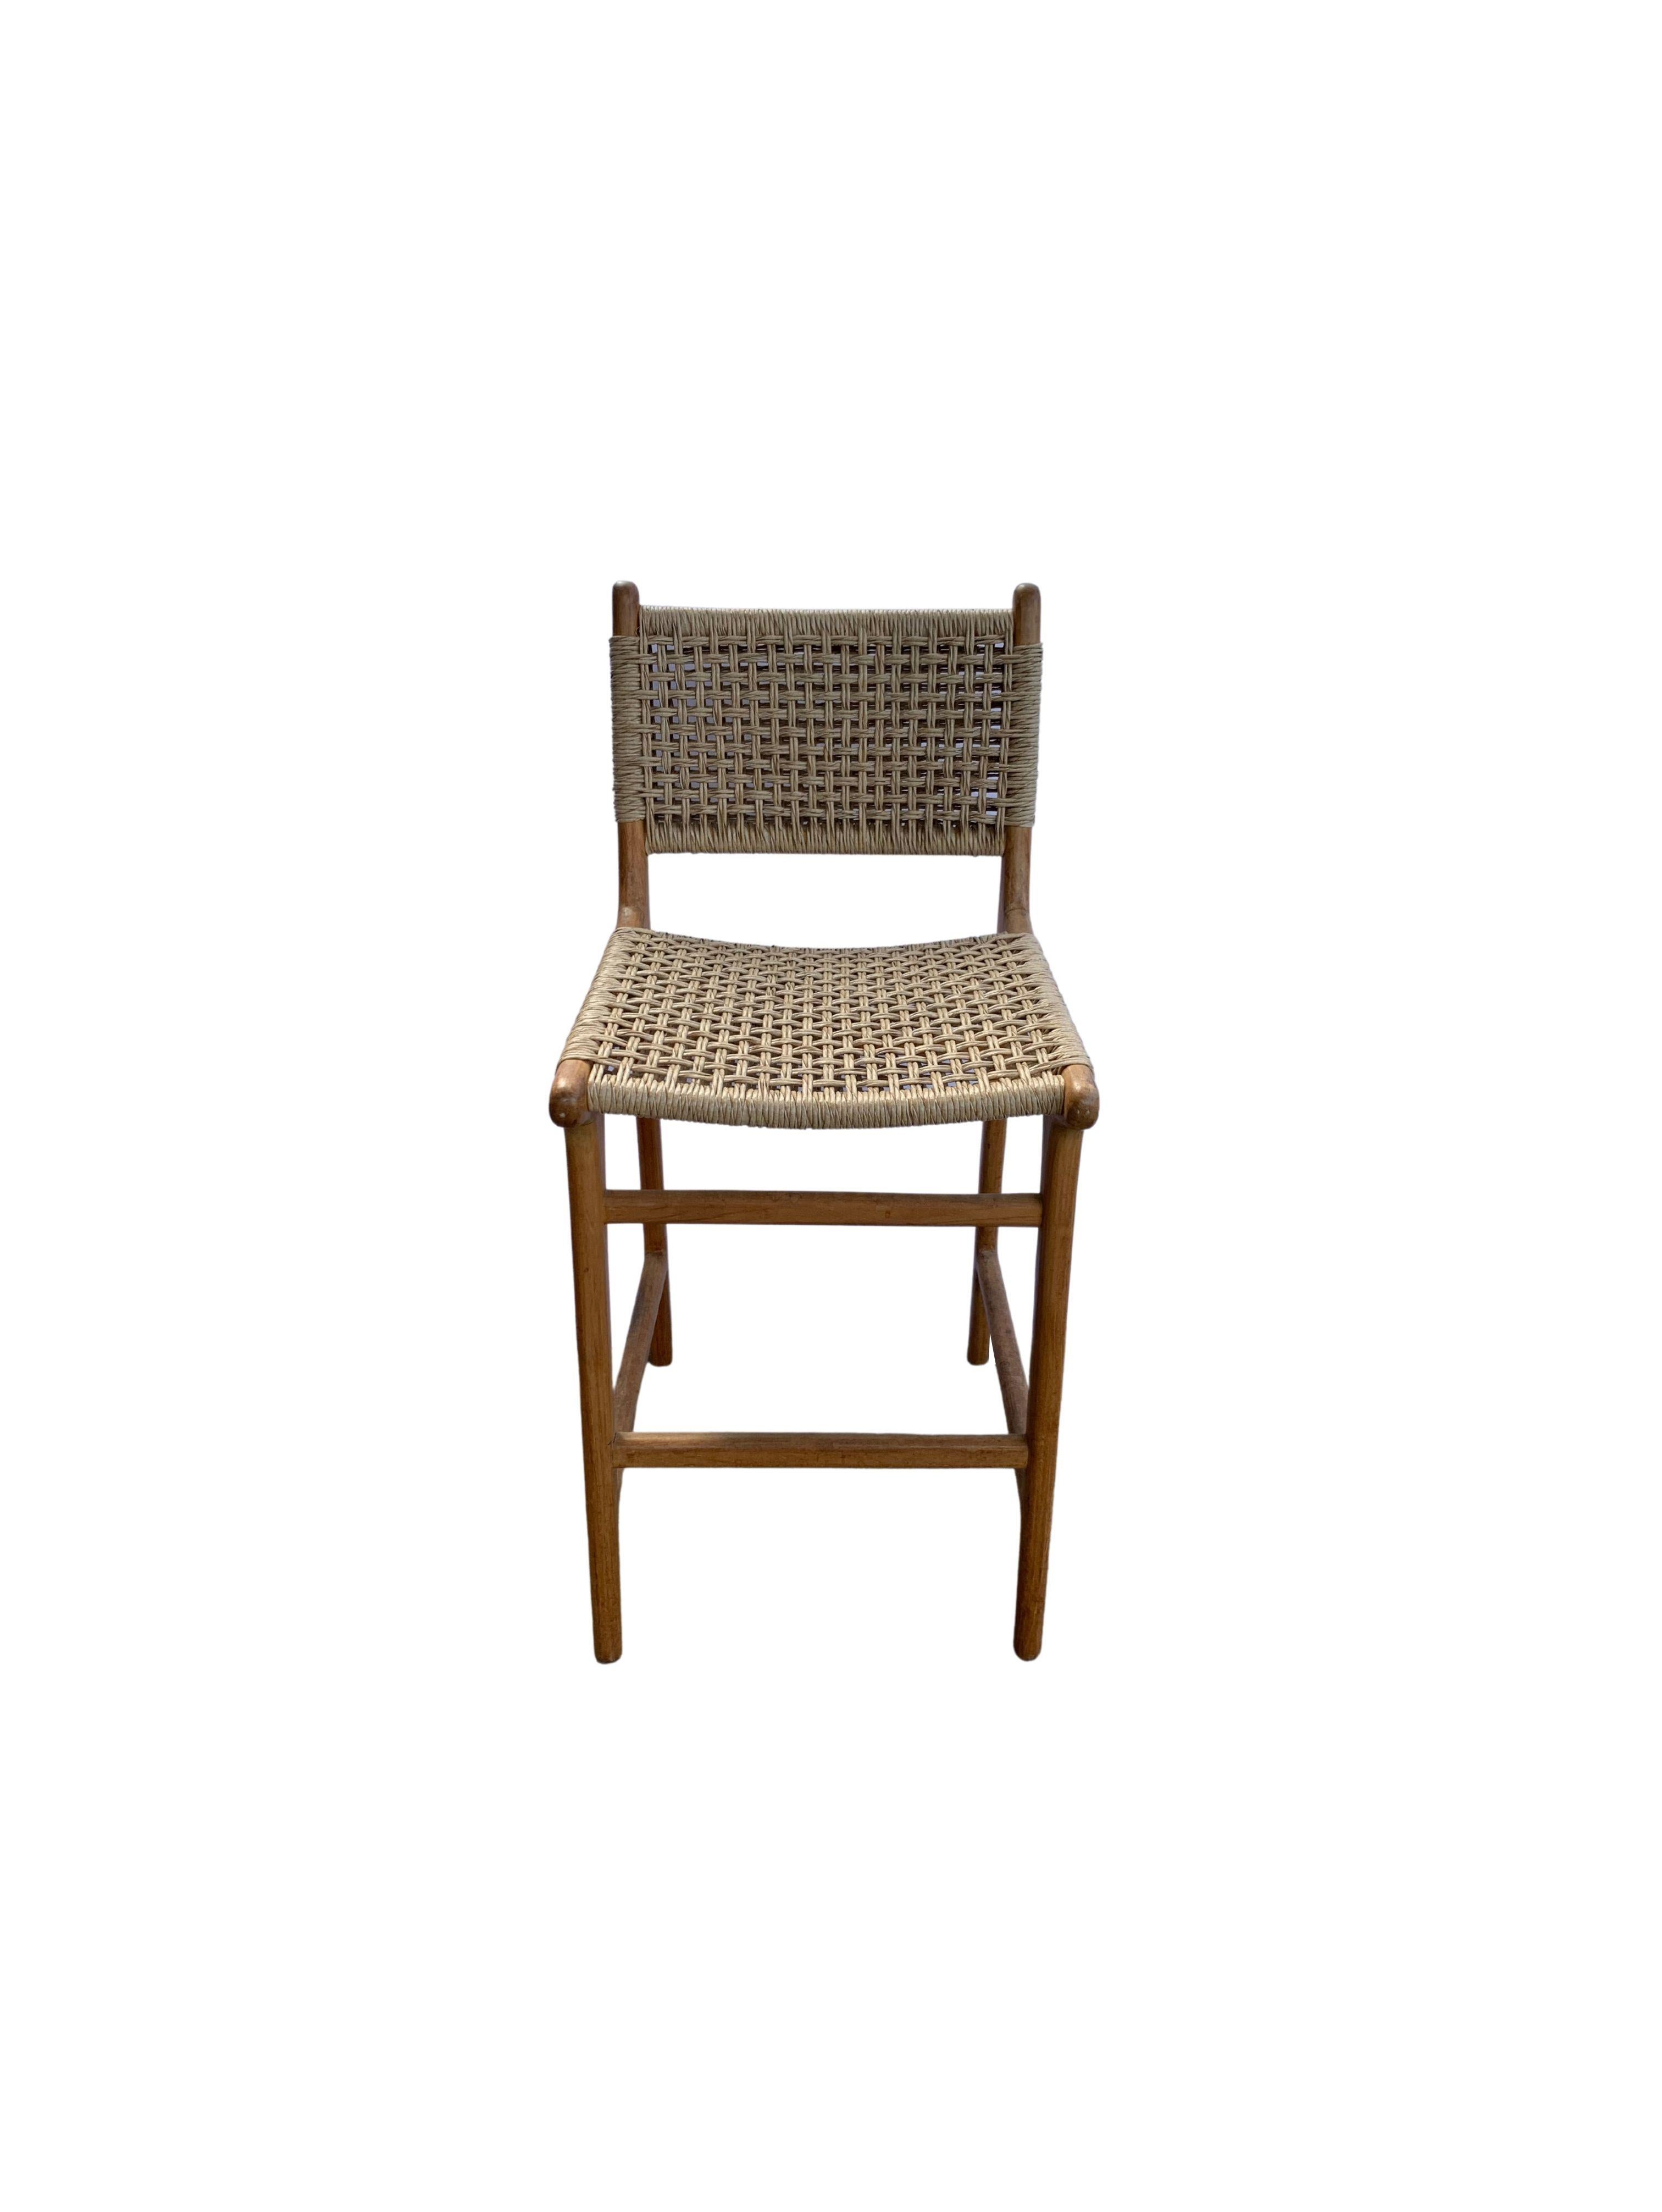 A hand-crafted teak framed & woven synthetic rattan stool. These stools are crafted by local artisans using a wood joinery technique without the use of nails. They feature a subtle wood texture and are robust and sturdy. Synthetic rattan is more low